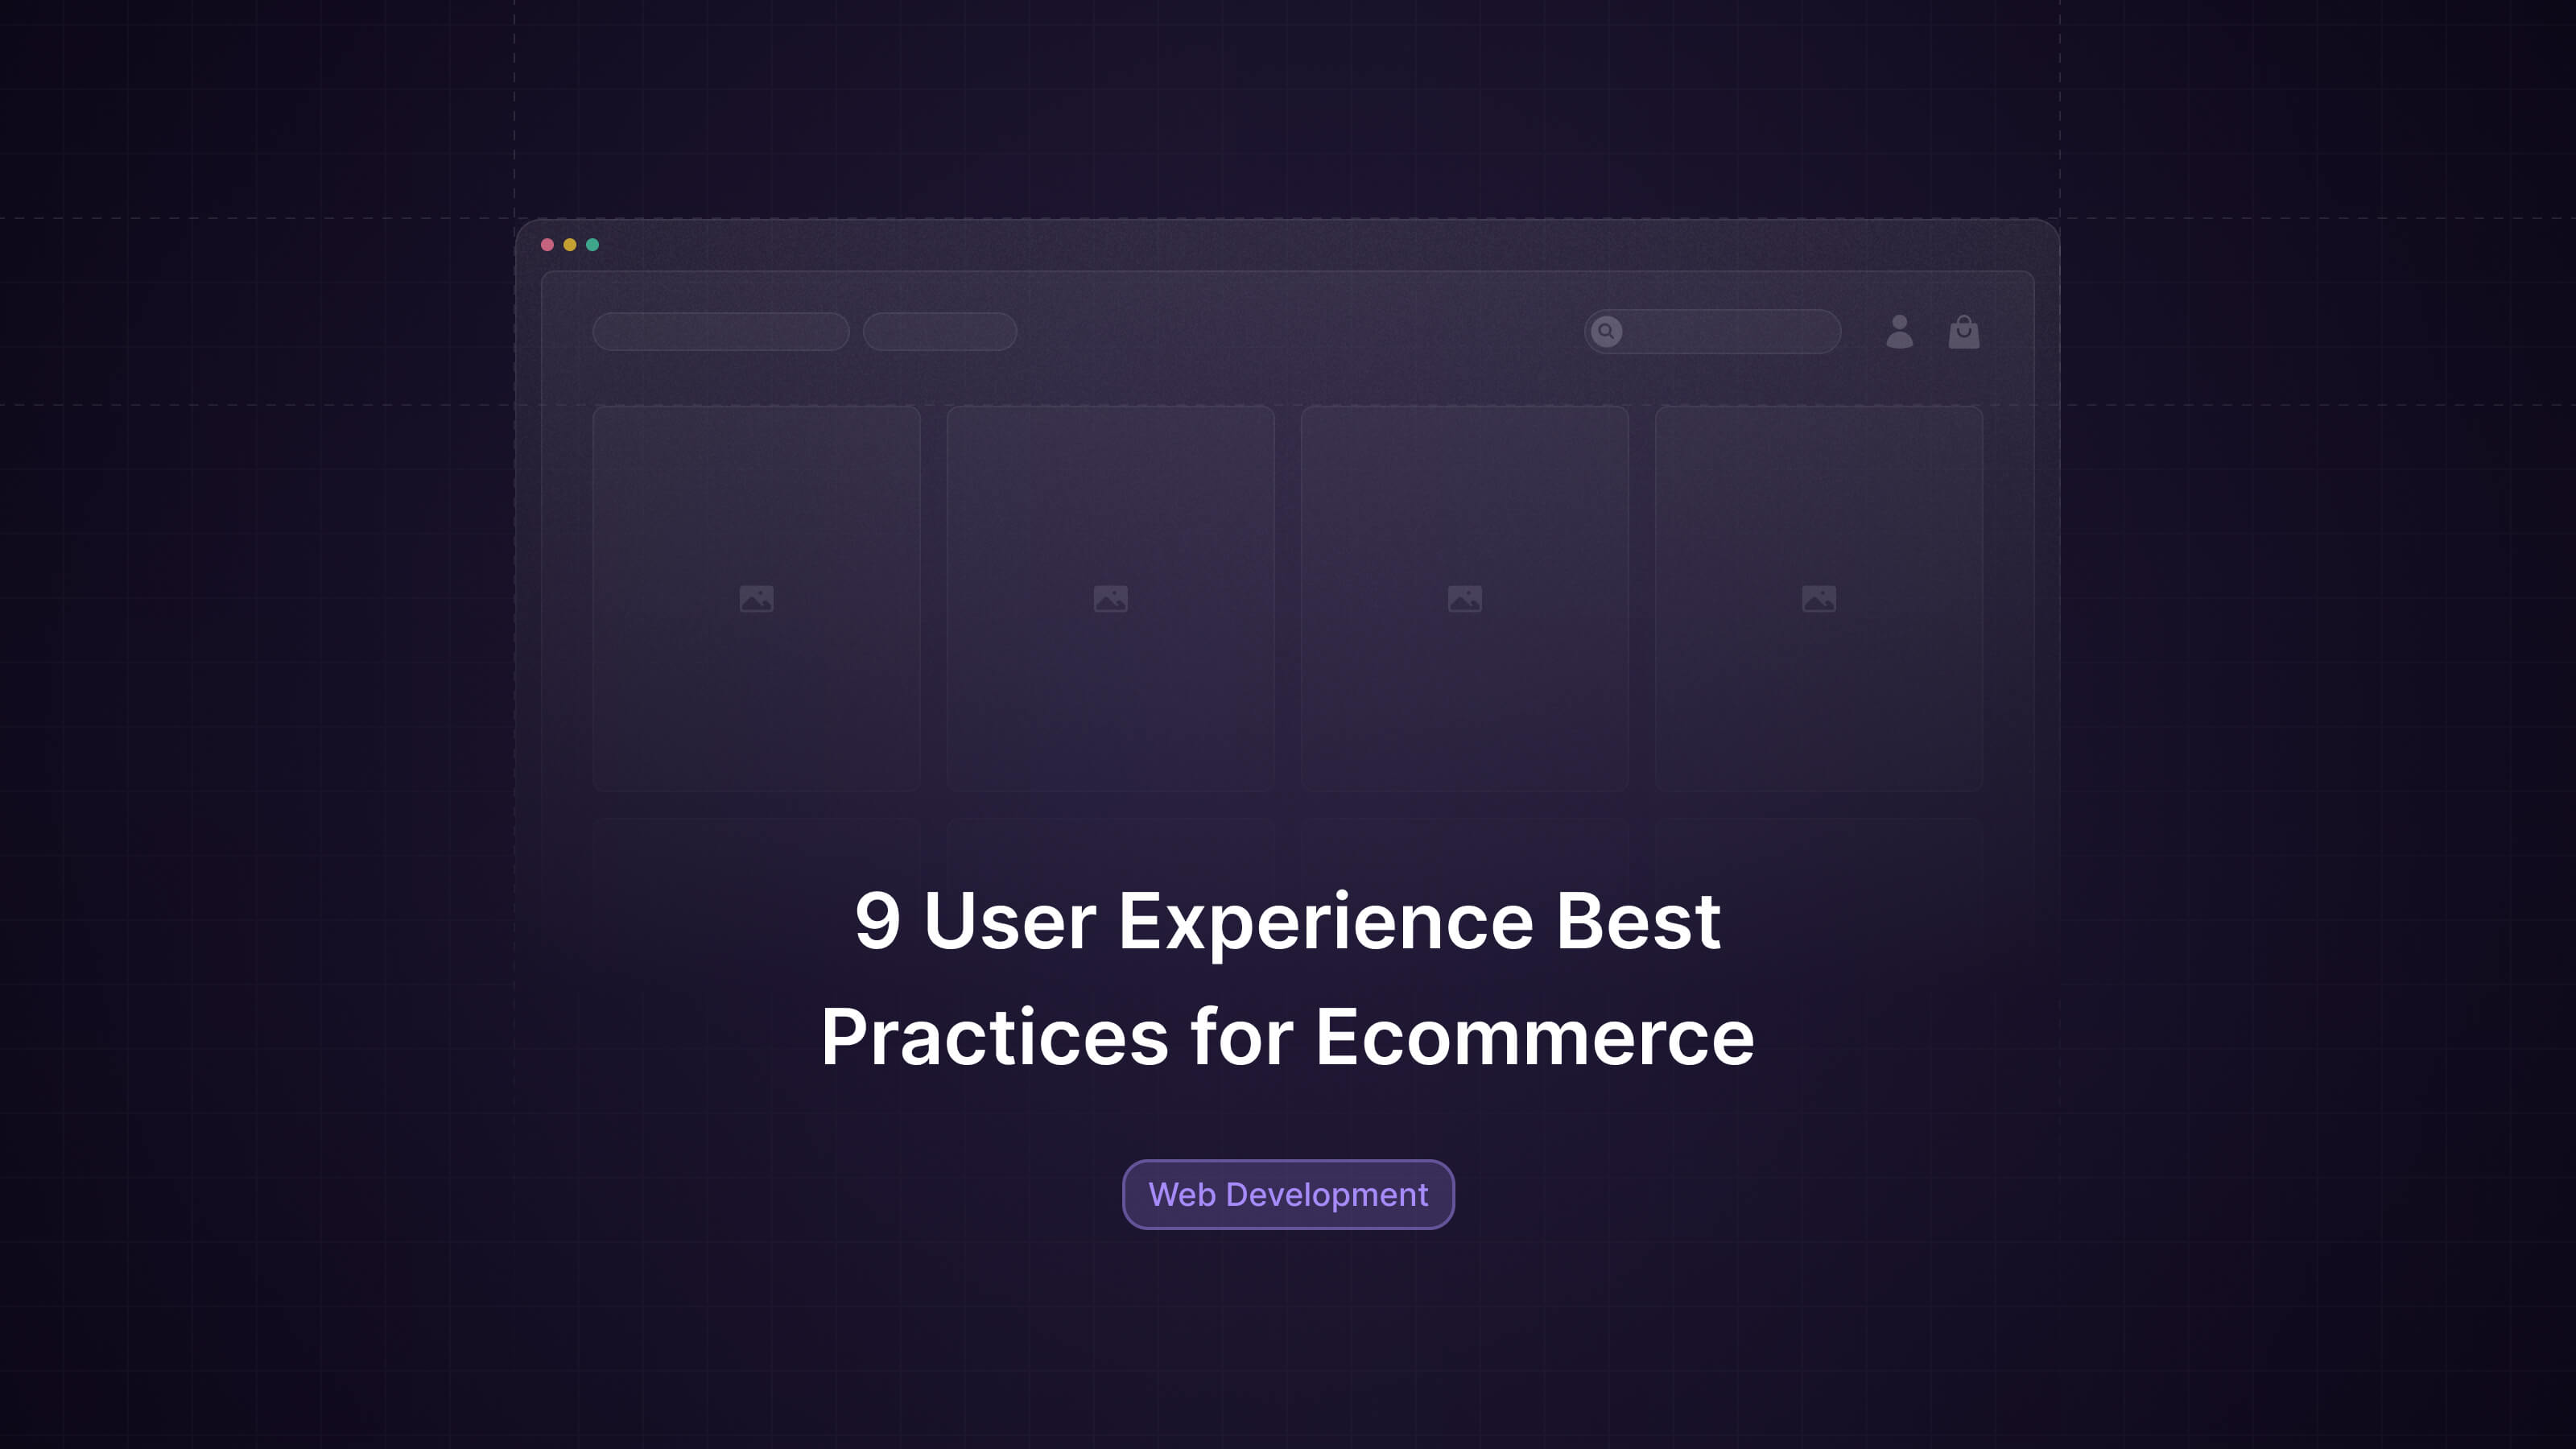 9 UX Best Practices for Ecommerce